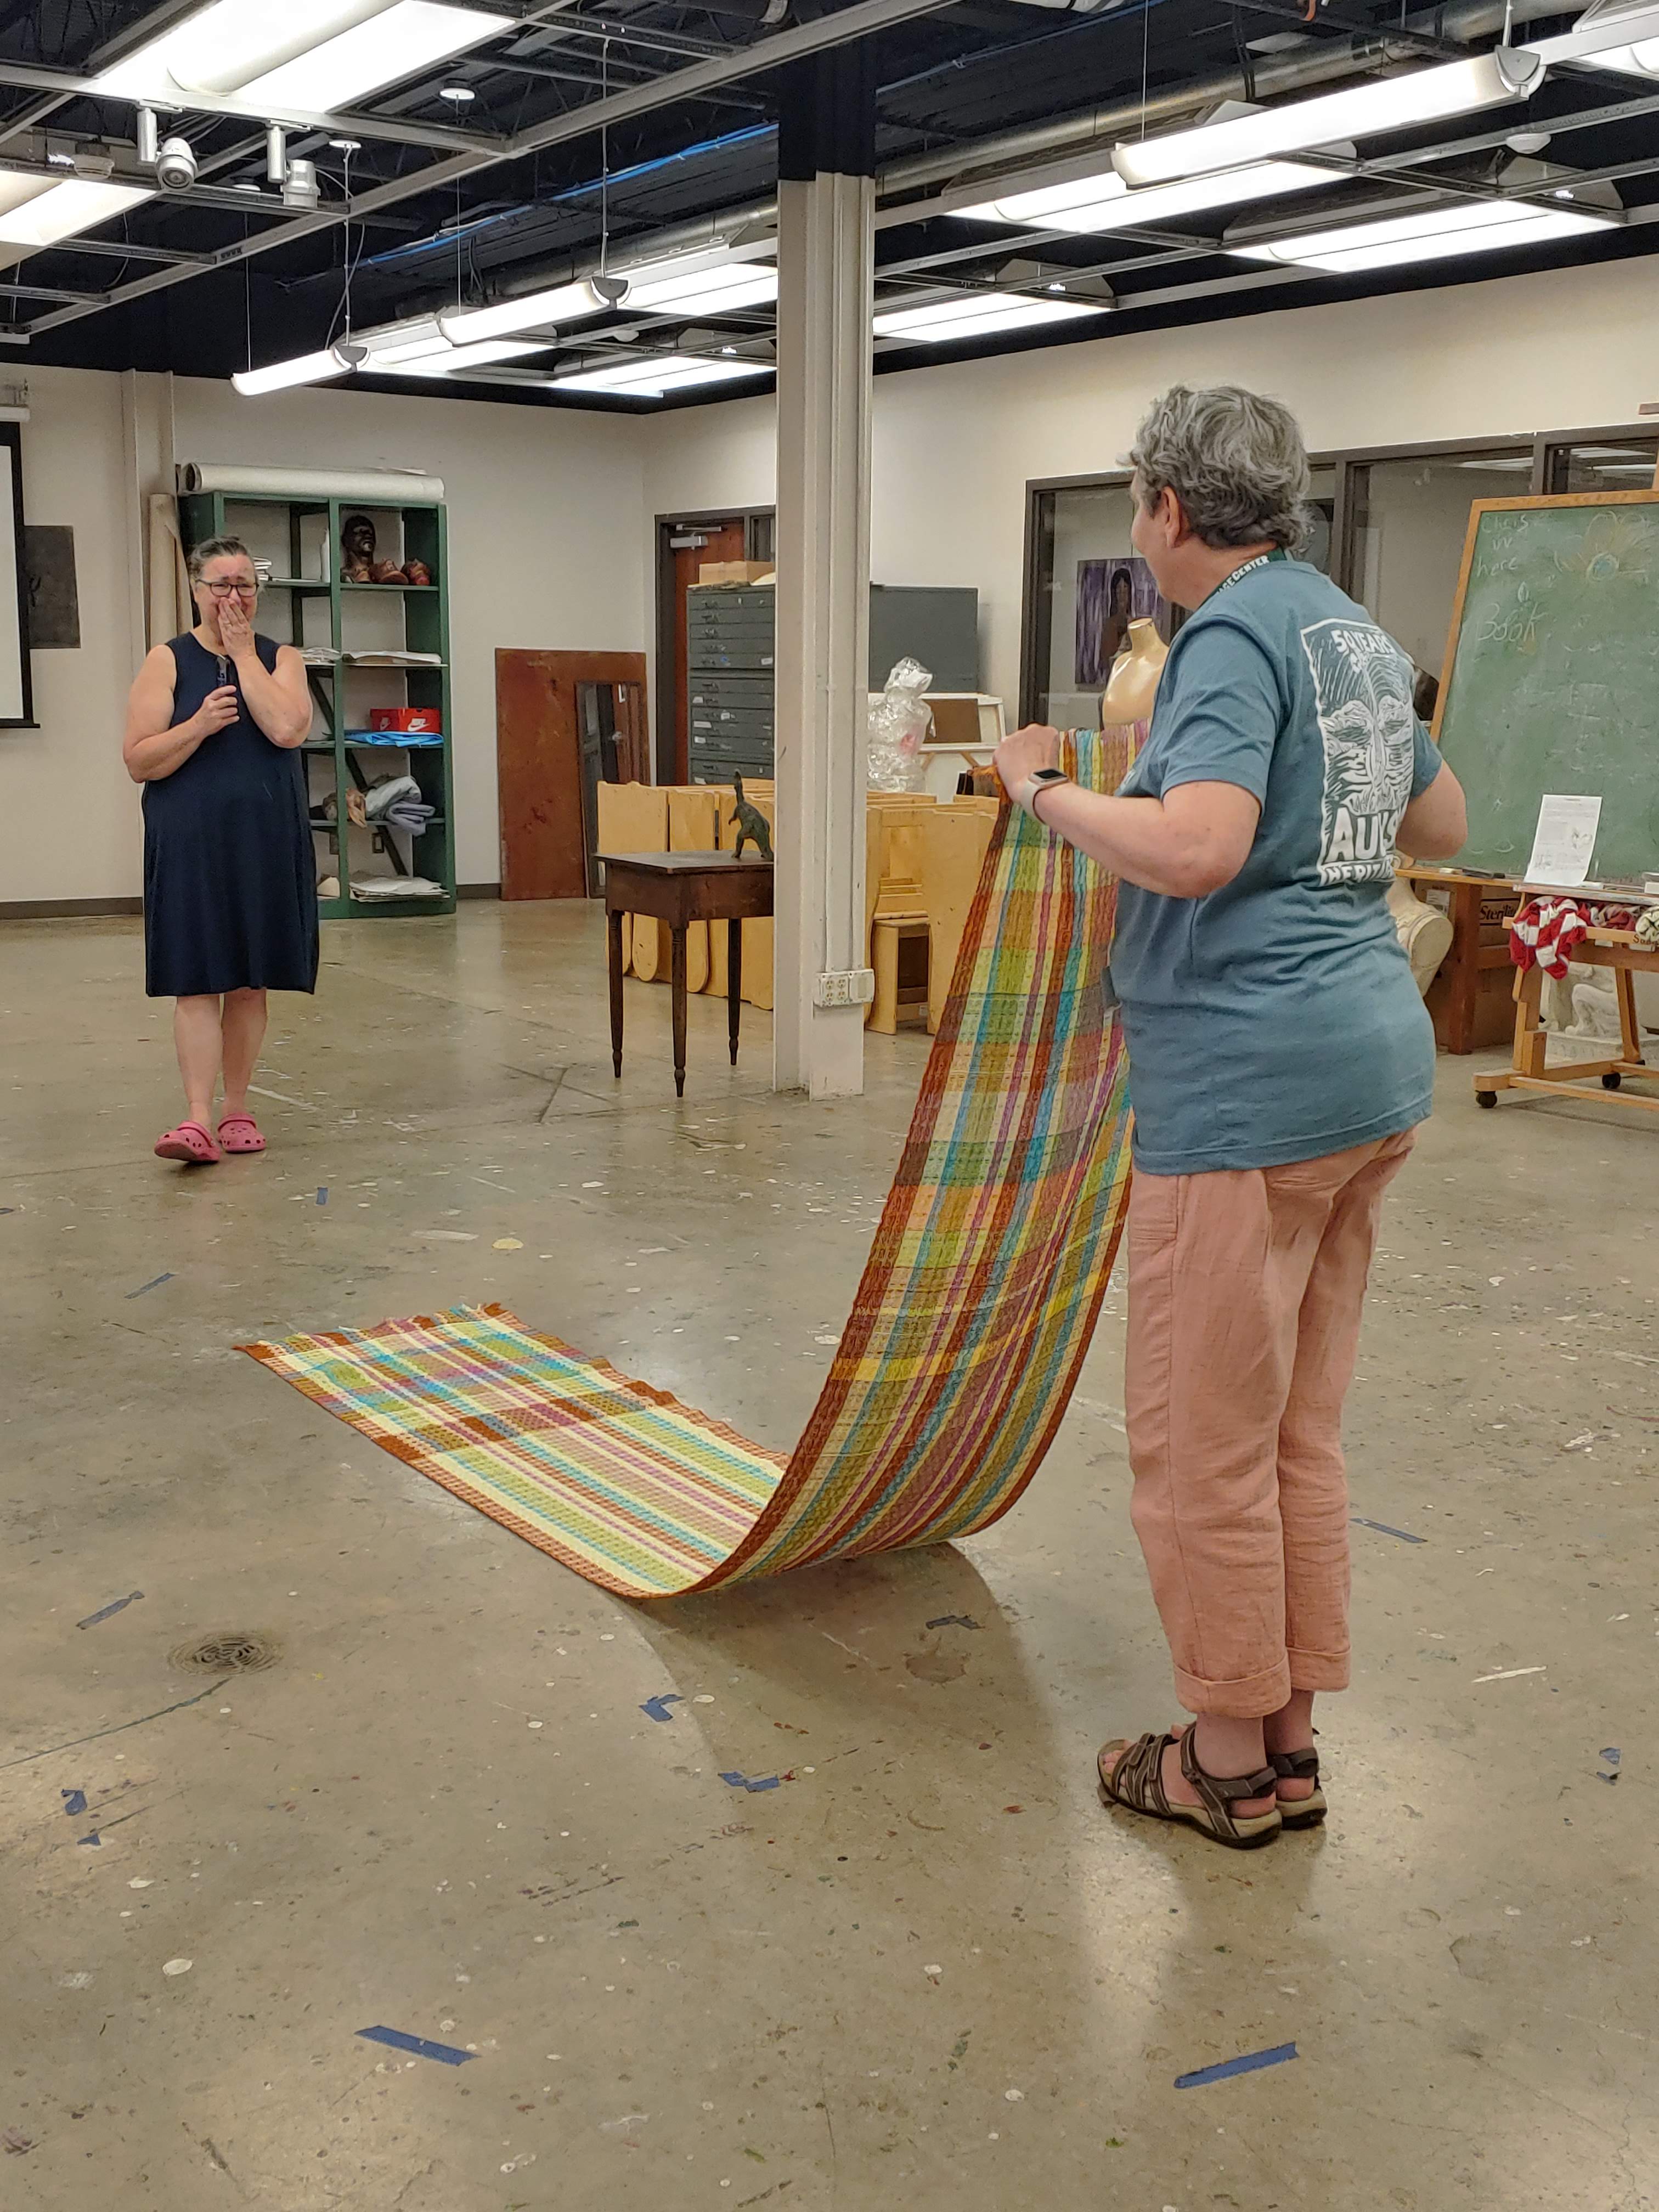 In the foreground, a woman stands with her back to the camera holding her colorful woven towels as one extended piece from the loom. She is showing her work to her teacher who stands in the background with her hand covering her mouth and smiling.